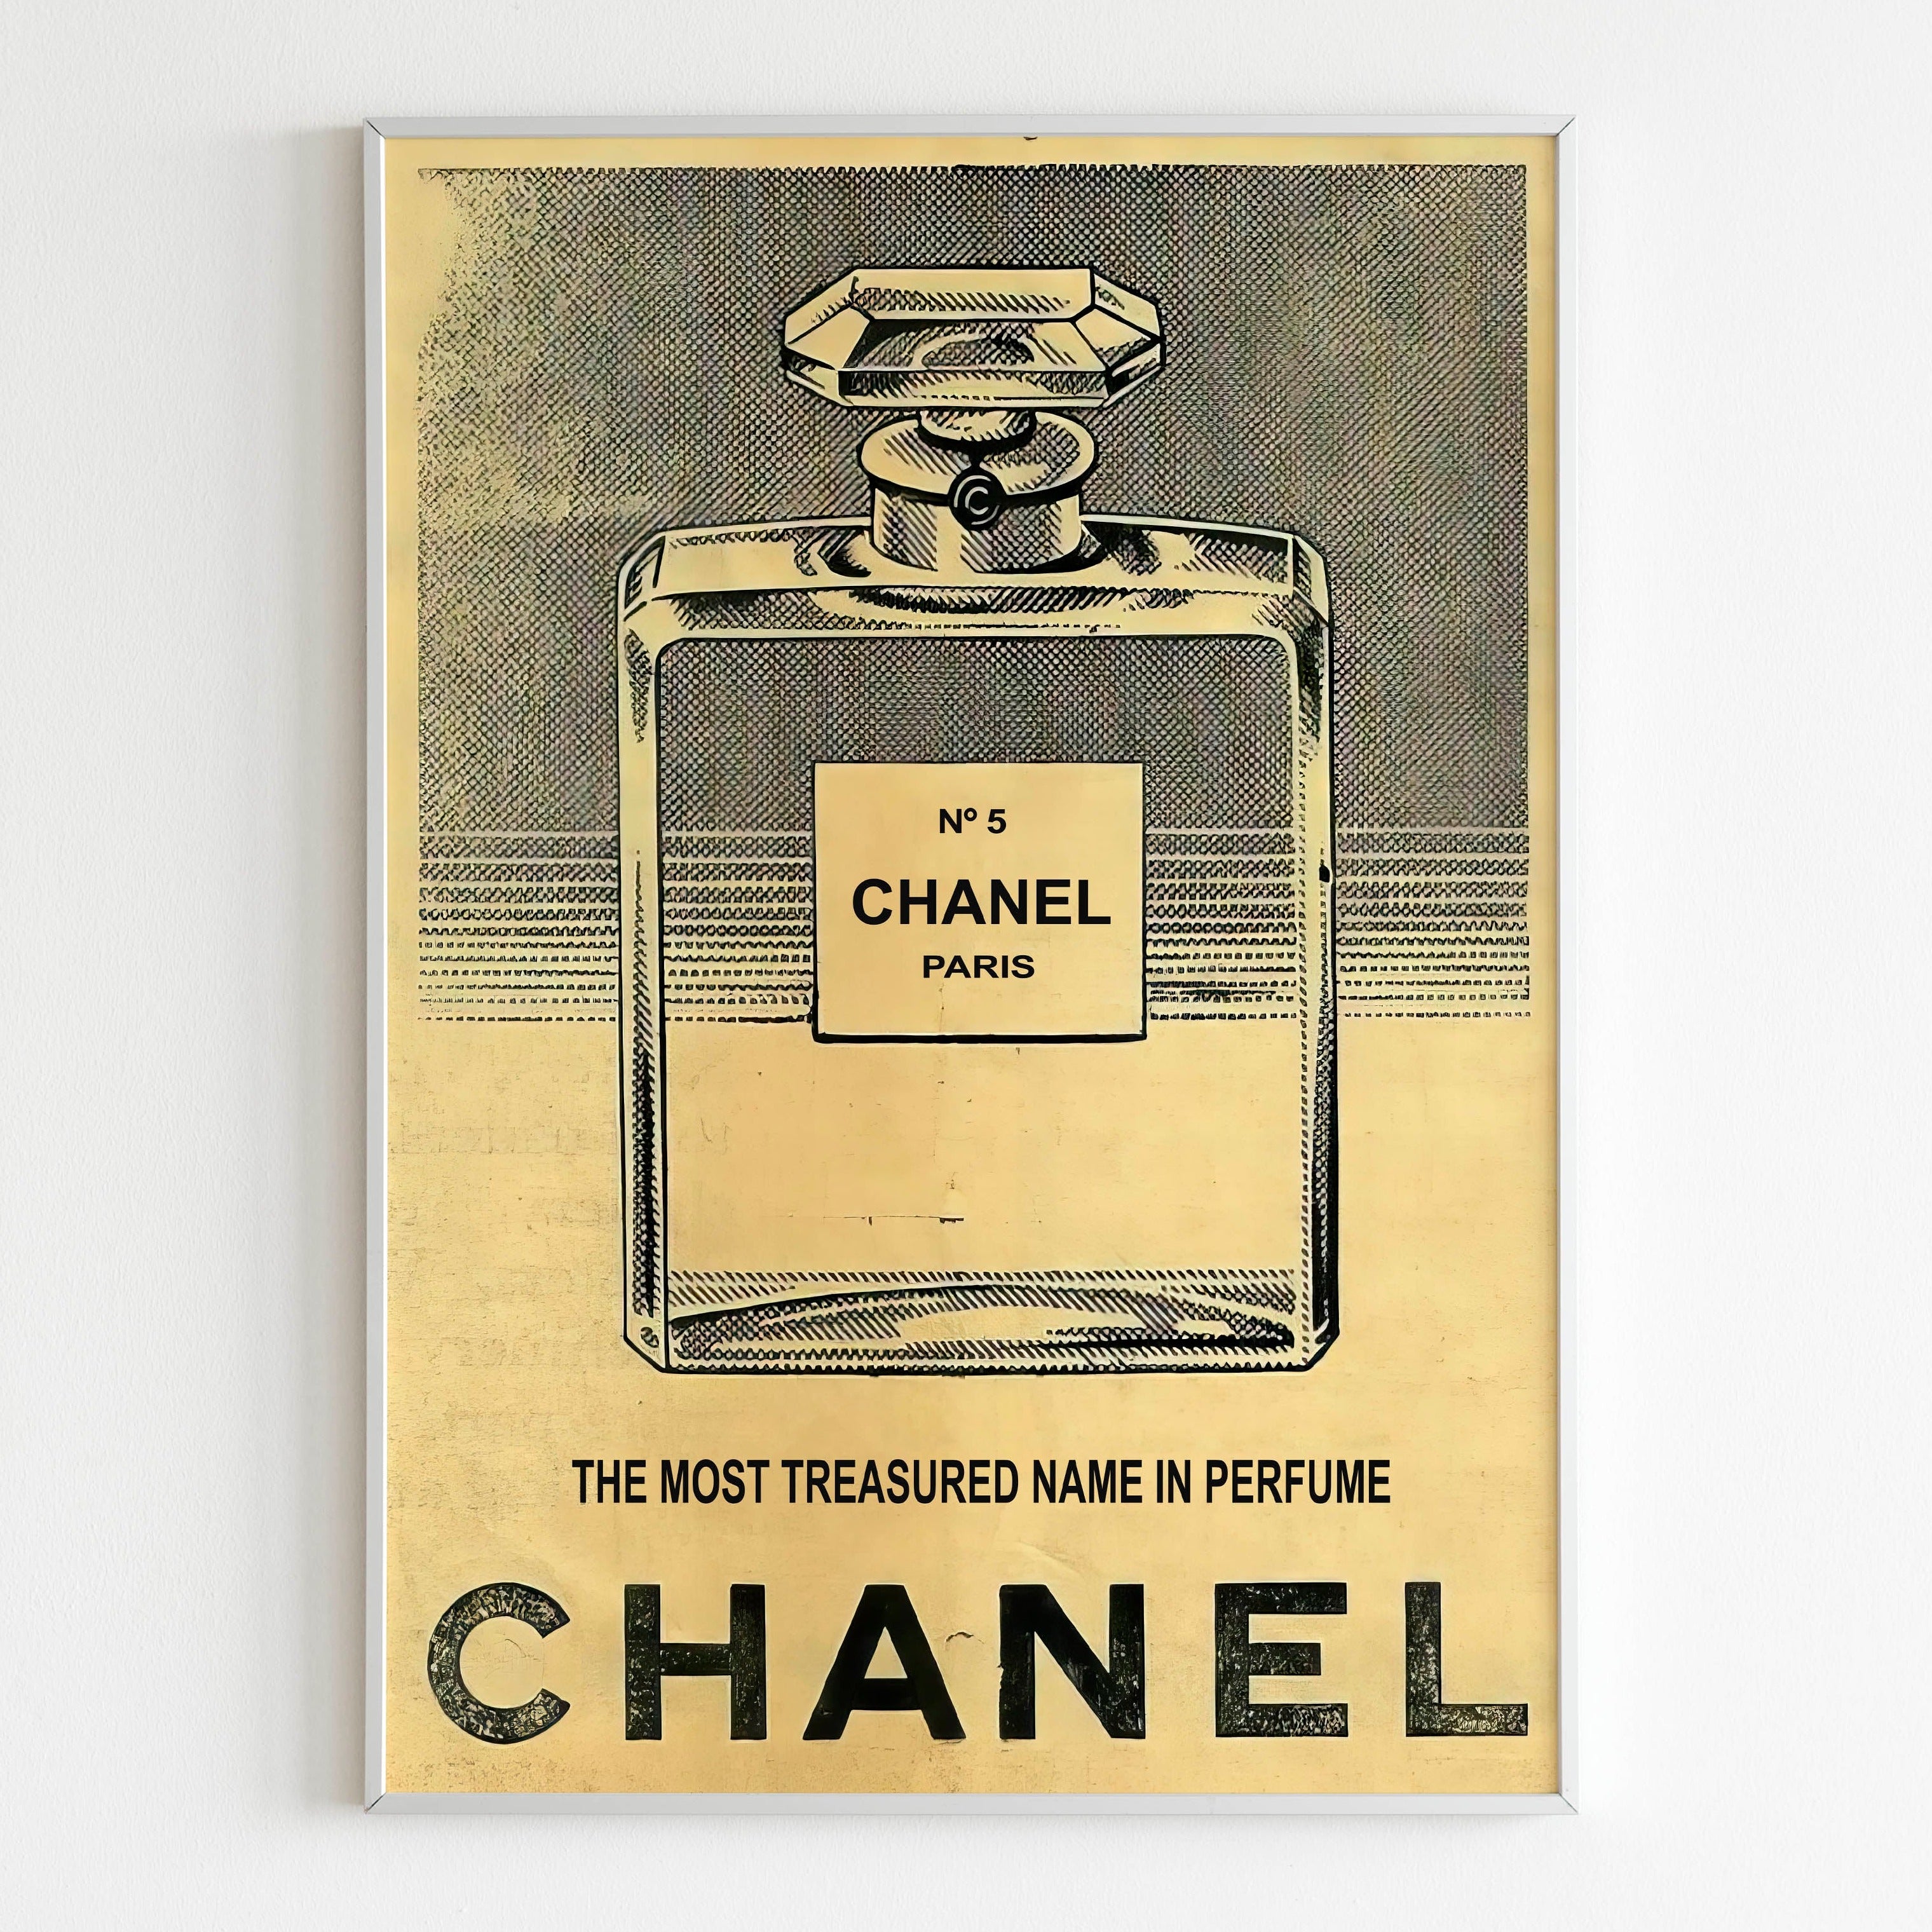 Chanel No 5 Perfume Advertising Poster, 50's Style Print, Ad Wall Art,  Vintage Design Magazine, Luxury Fashion Ads Poster